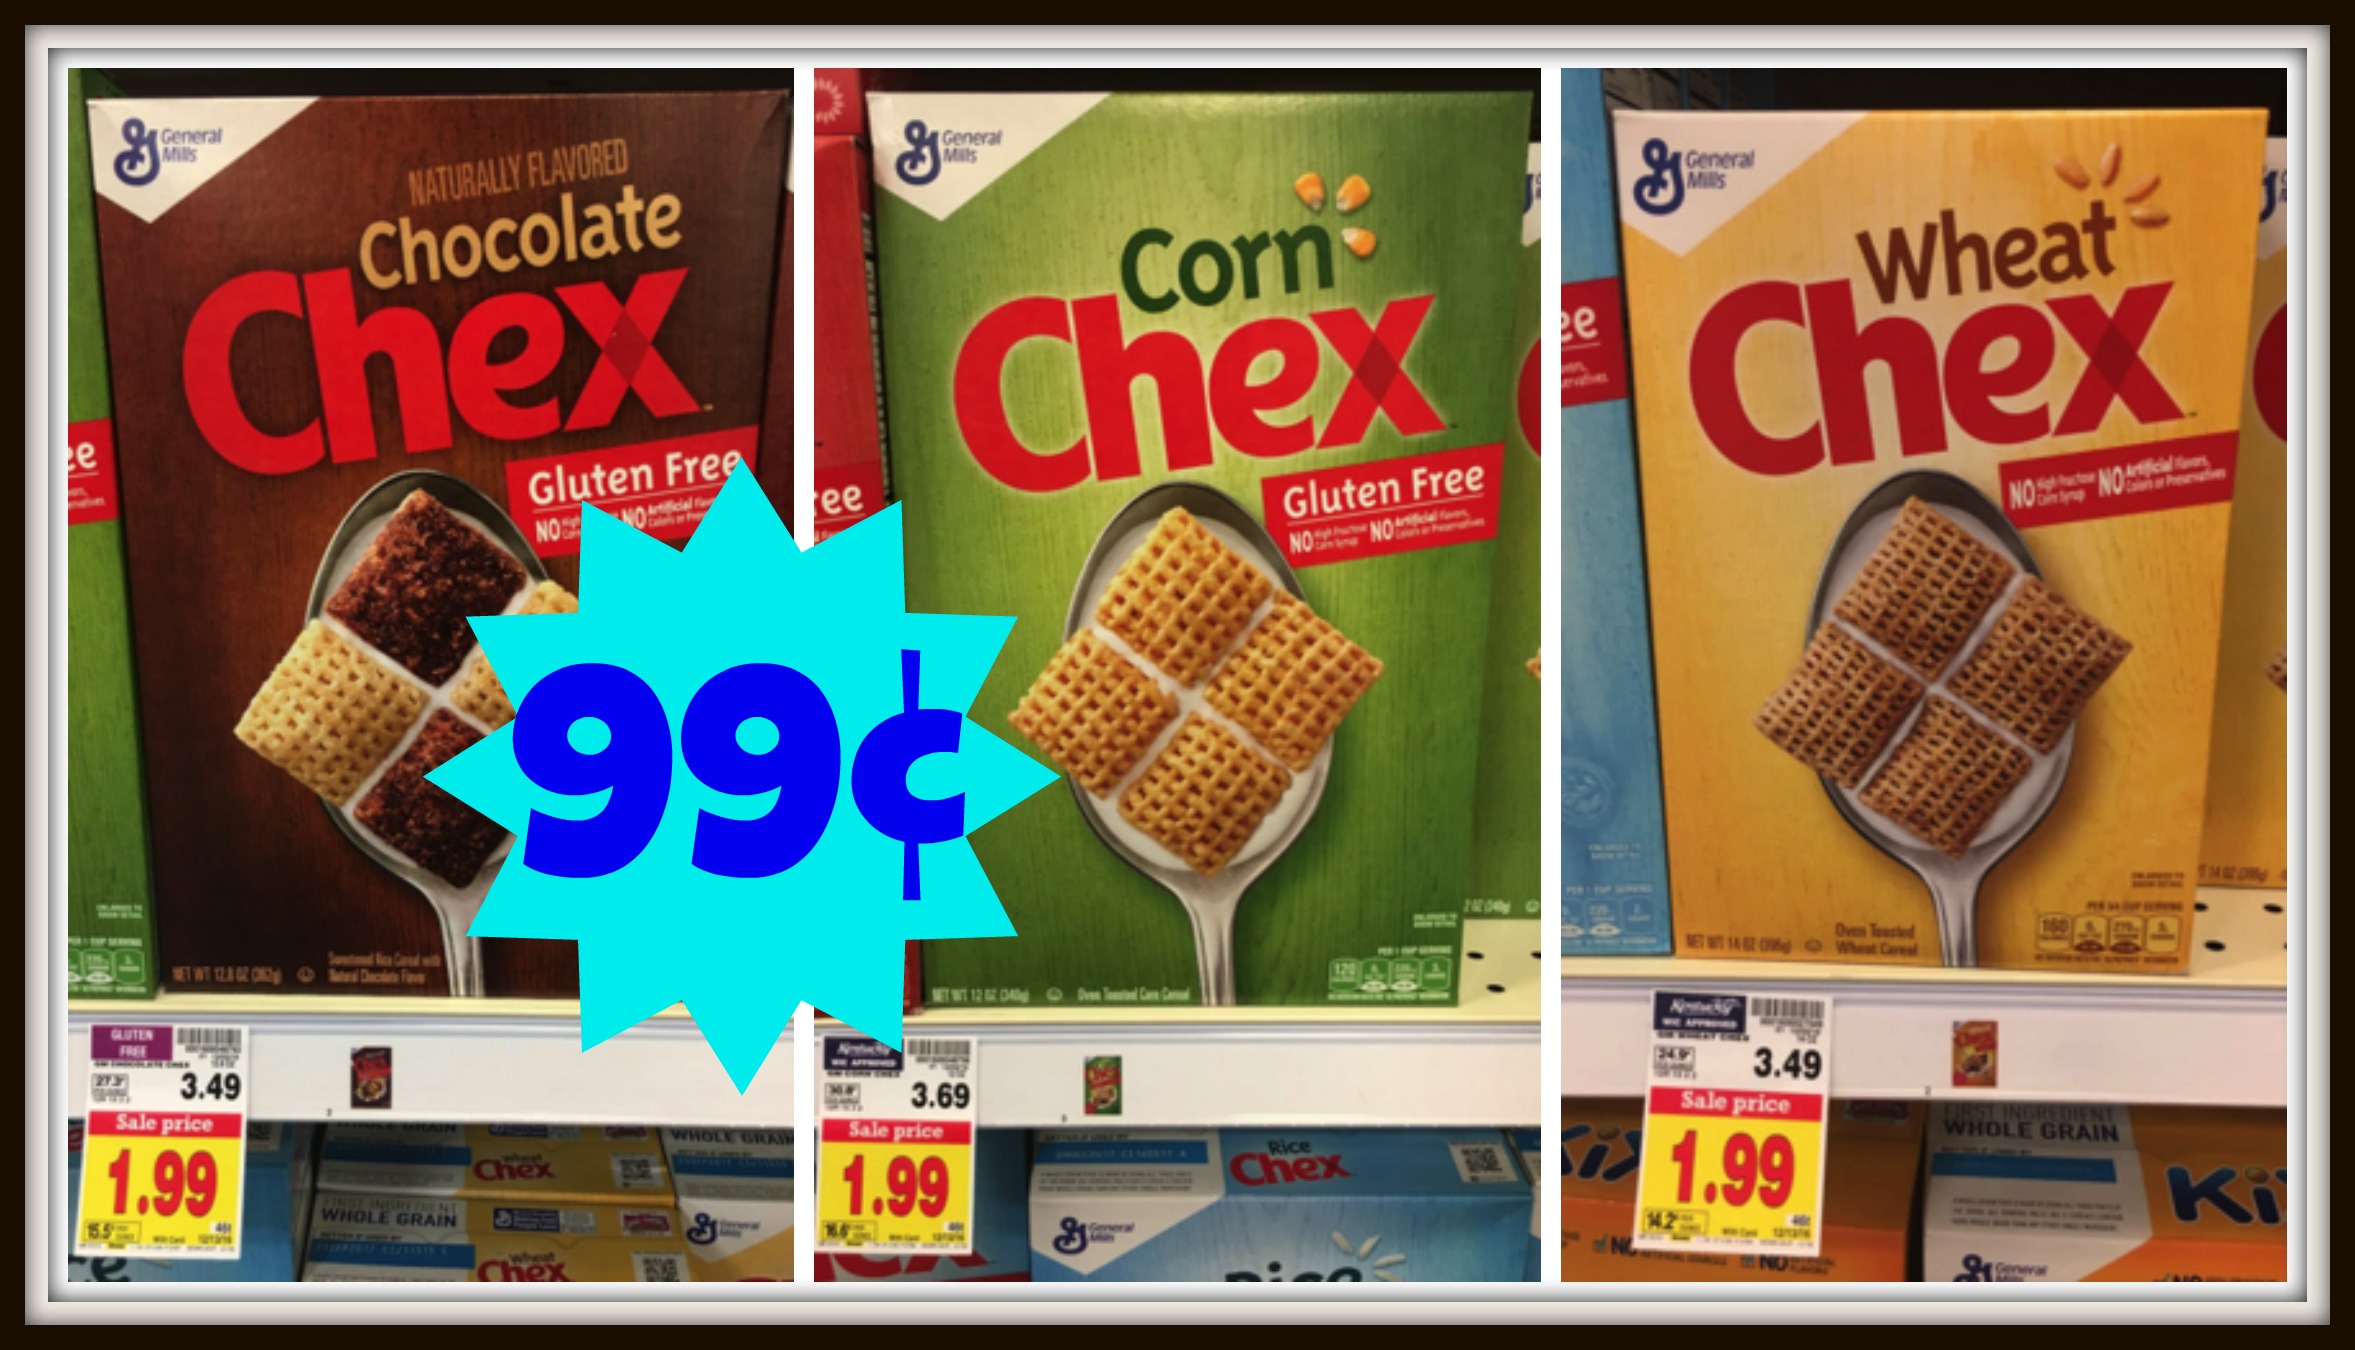 chex-cereal-image